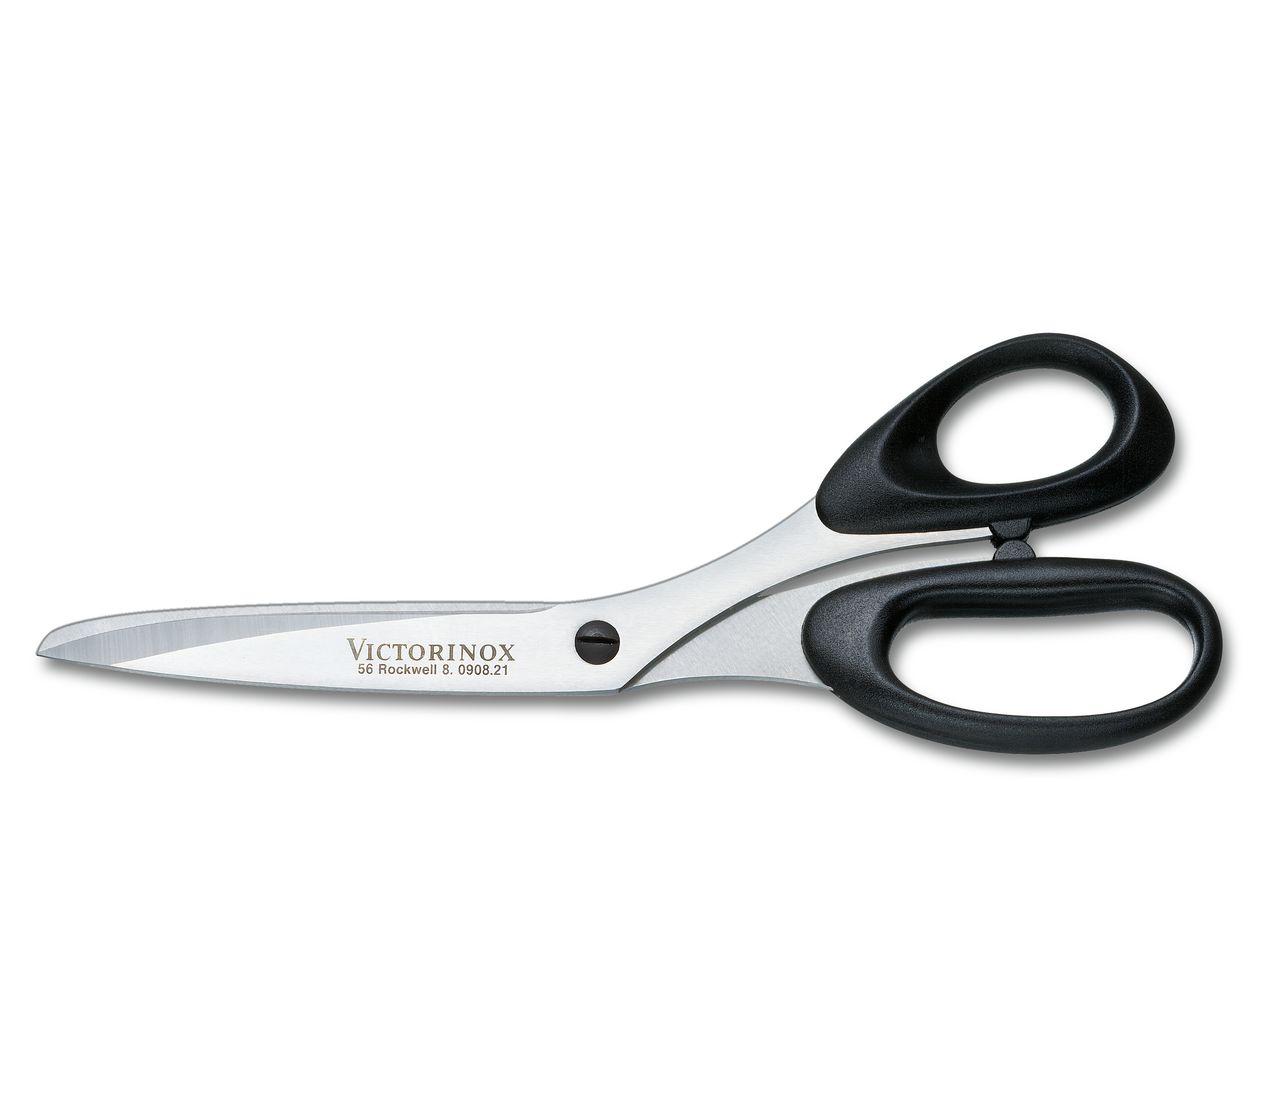 Household and Professional Scissors-8.0908.21